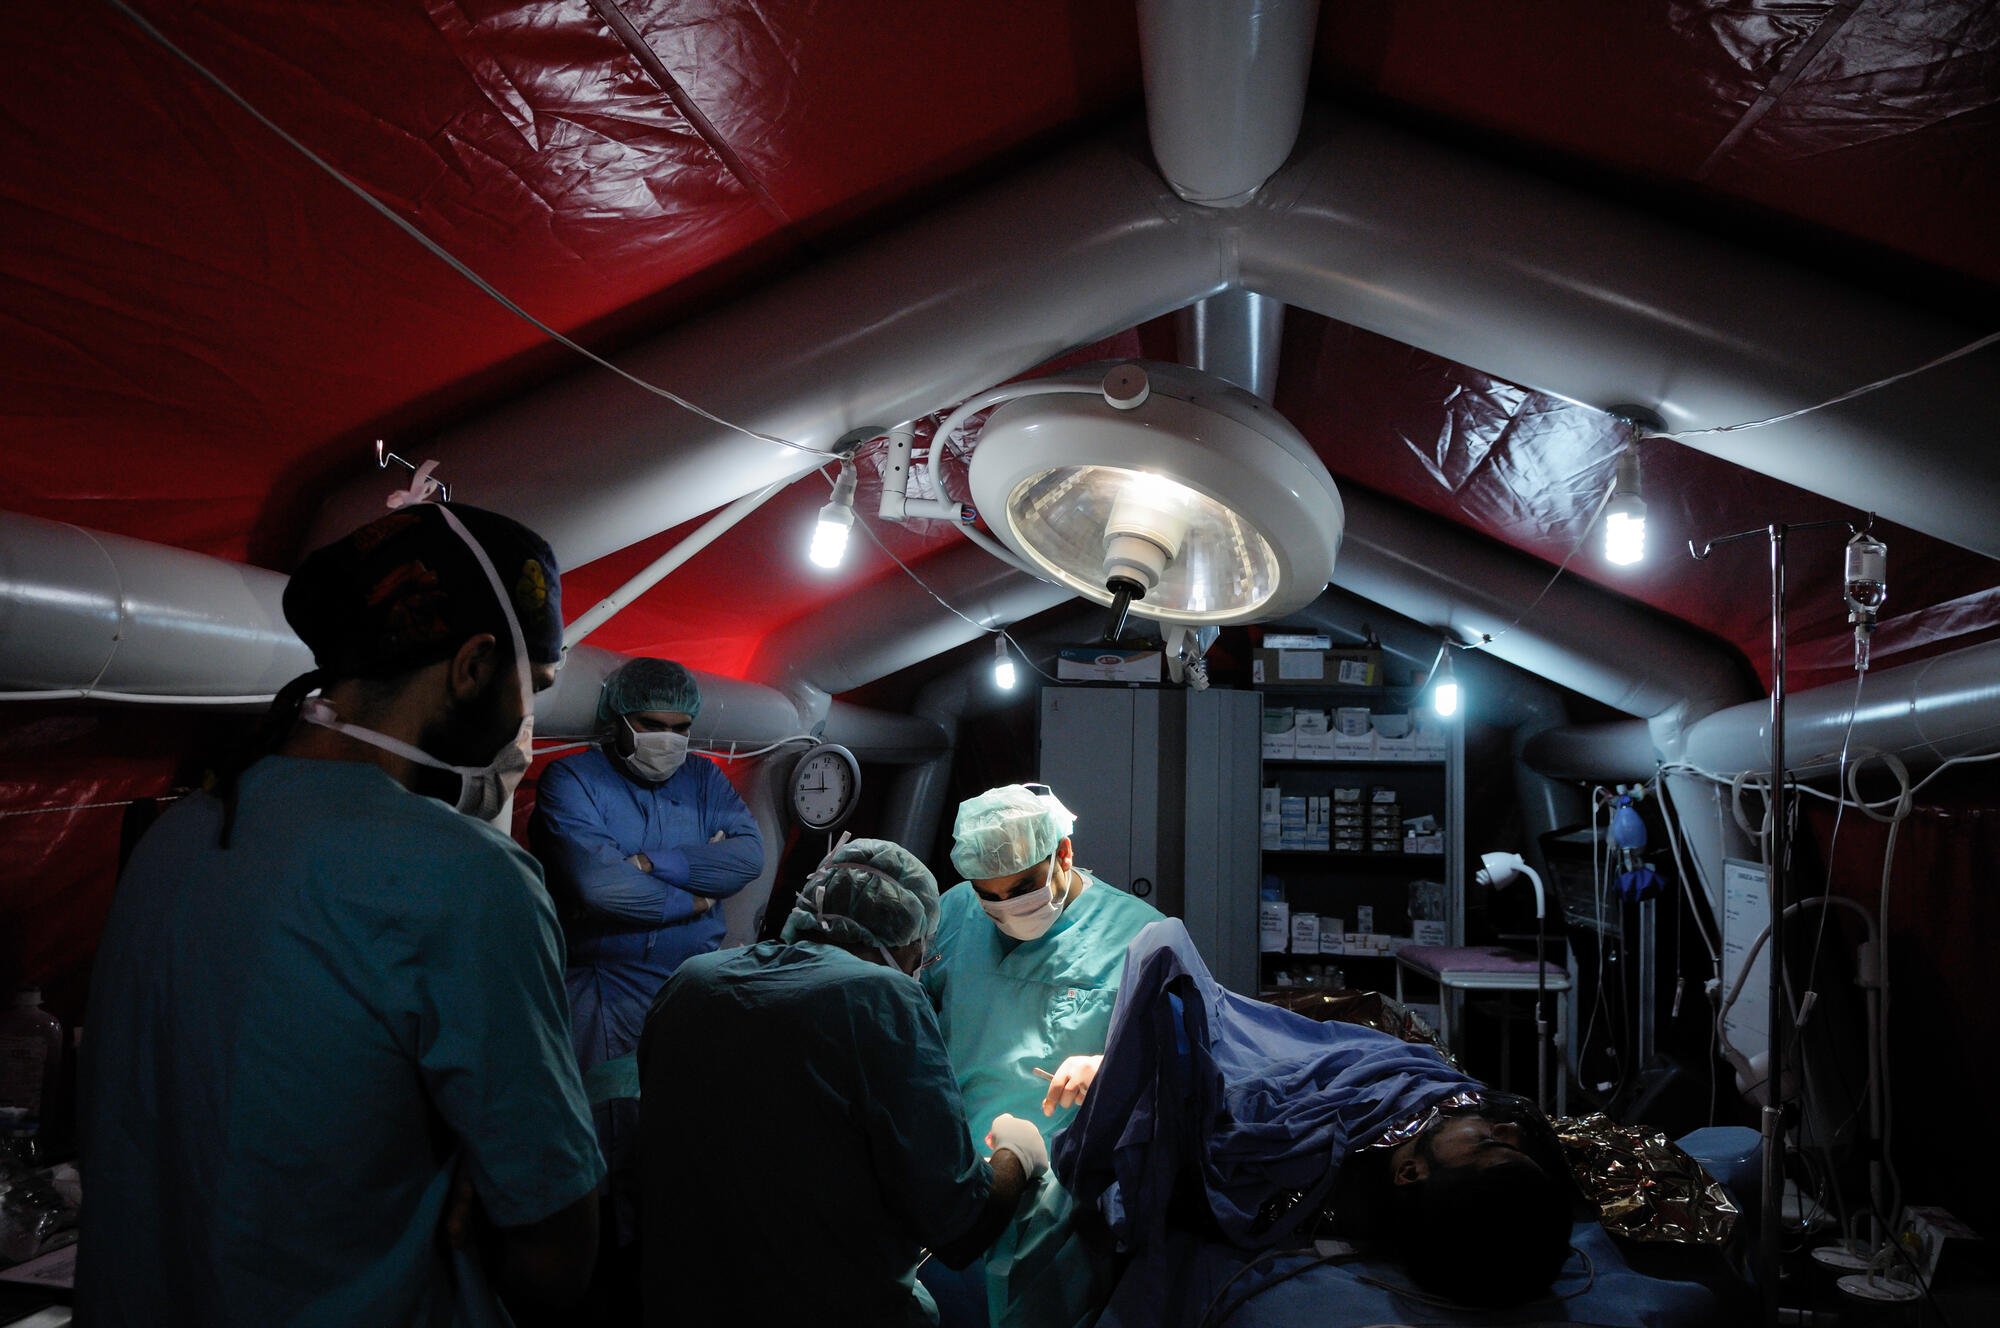 Field hospitals in unlikely places, December 2012.As frontlines shift in northwest Syria, MSF converts a disused chicken farm into a field hospital, providing emergency trauma surgery as well as primary and secondary medical care. ©Robin Meldrum/MSF